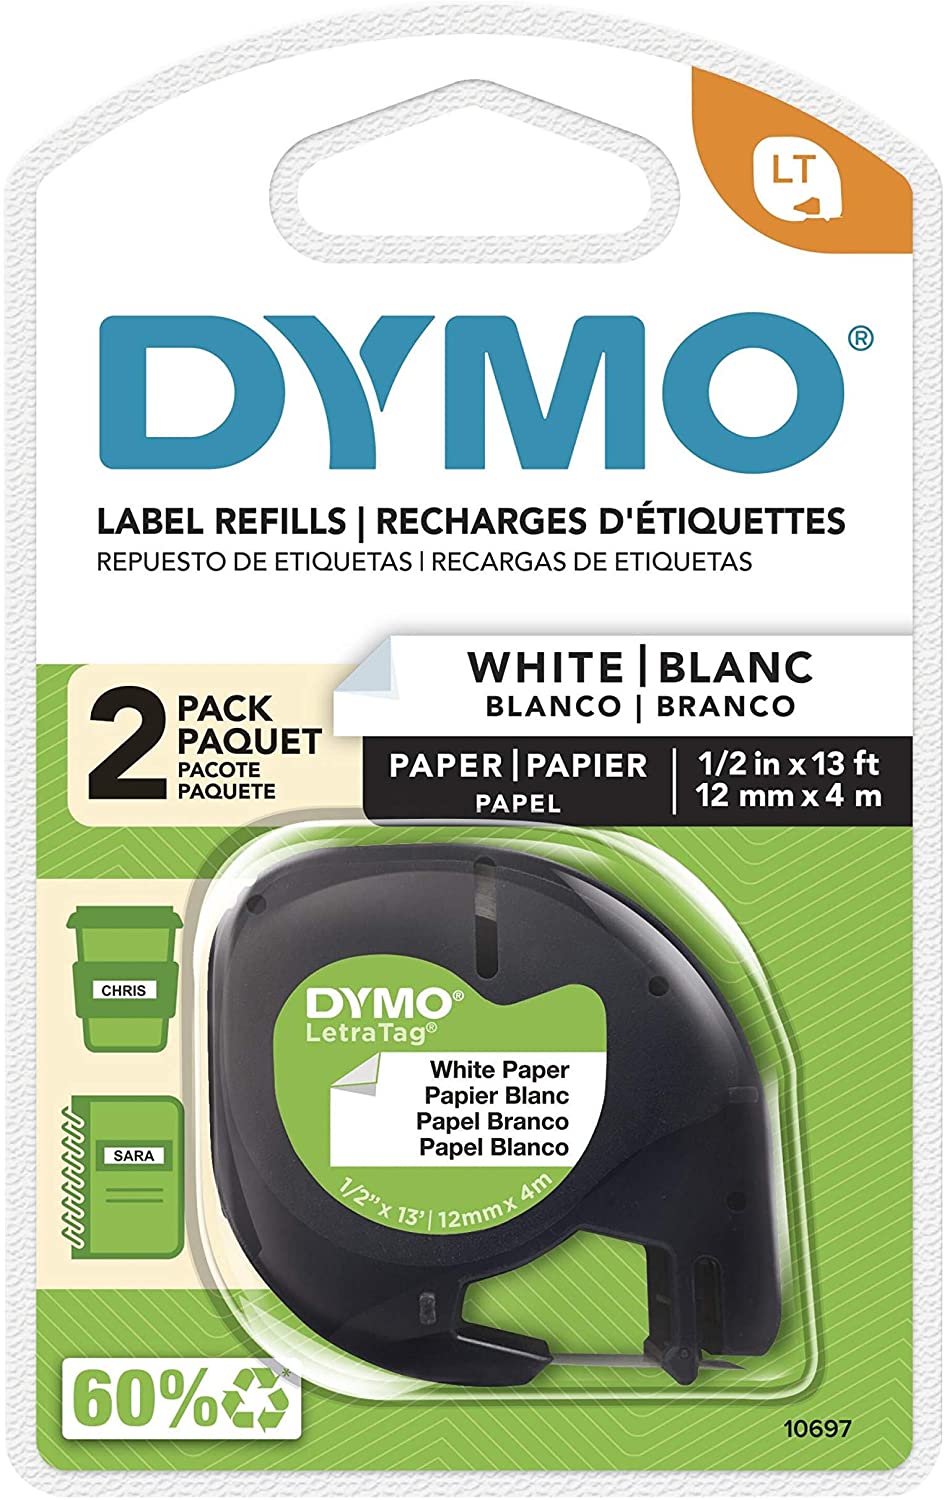 DYMO LetraTag Labeling Tape for LetraTag Label Makers, Black Print on White Paper Tape, 1/2'' W x 13' L, 2 Rolls (10697)